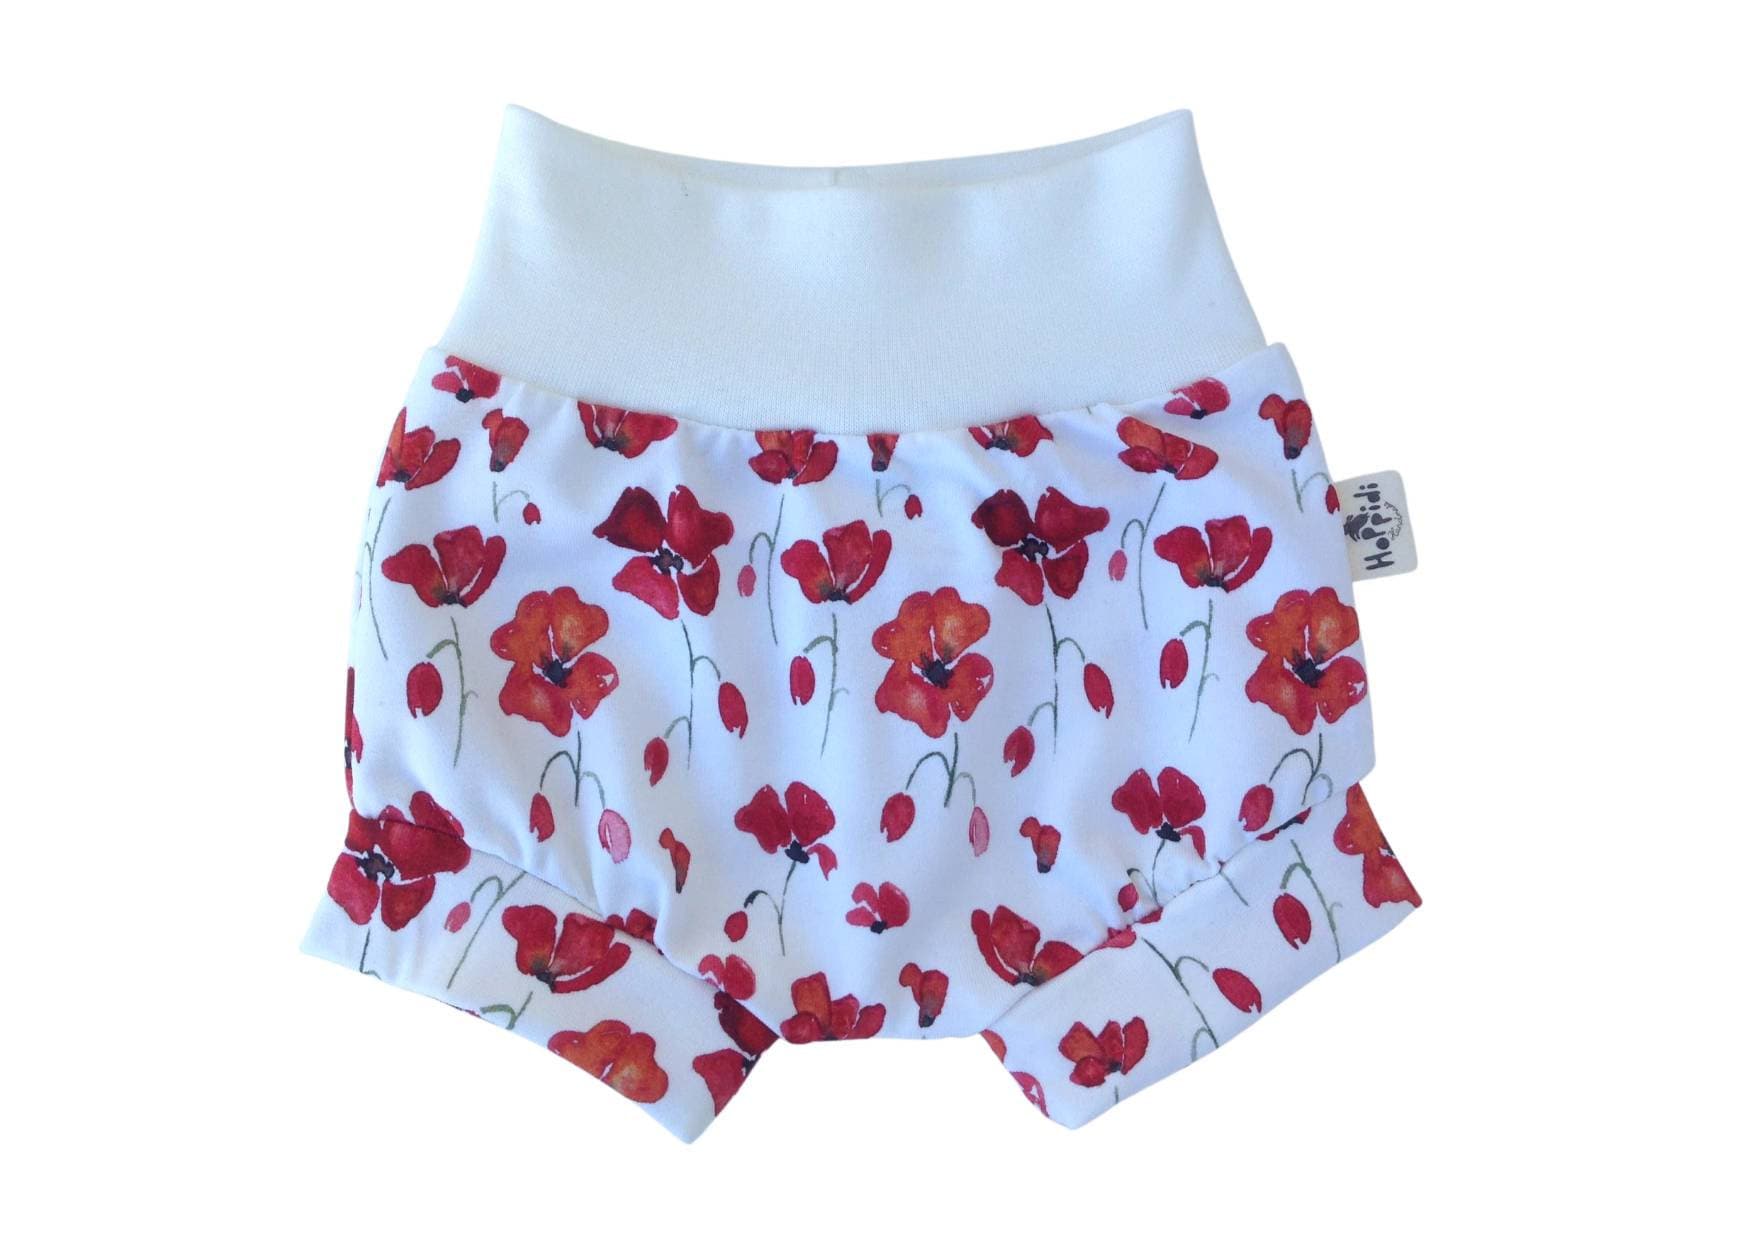 Red Poppy Flowers Women's Underpants, Floral Comfortable Organic Cotton  Jersey Lounge Panties, Elastic Free Underwear Boyleg and Brief Style -   Canada